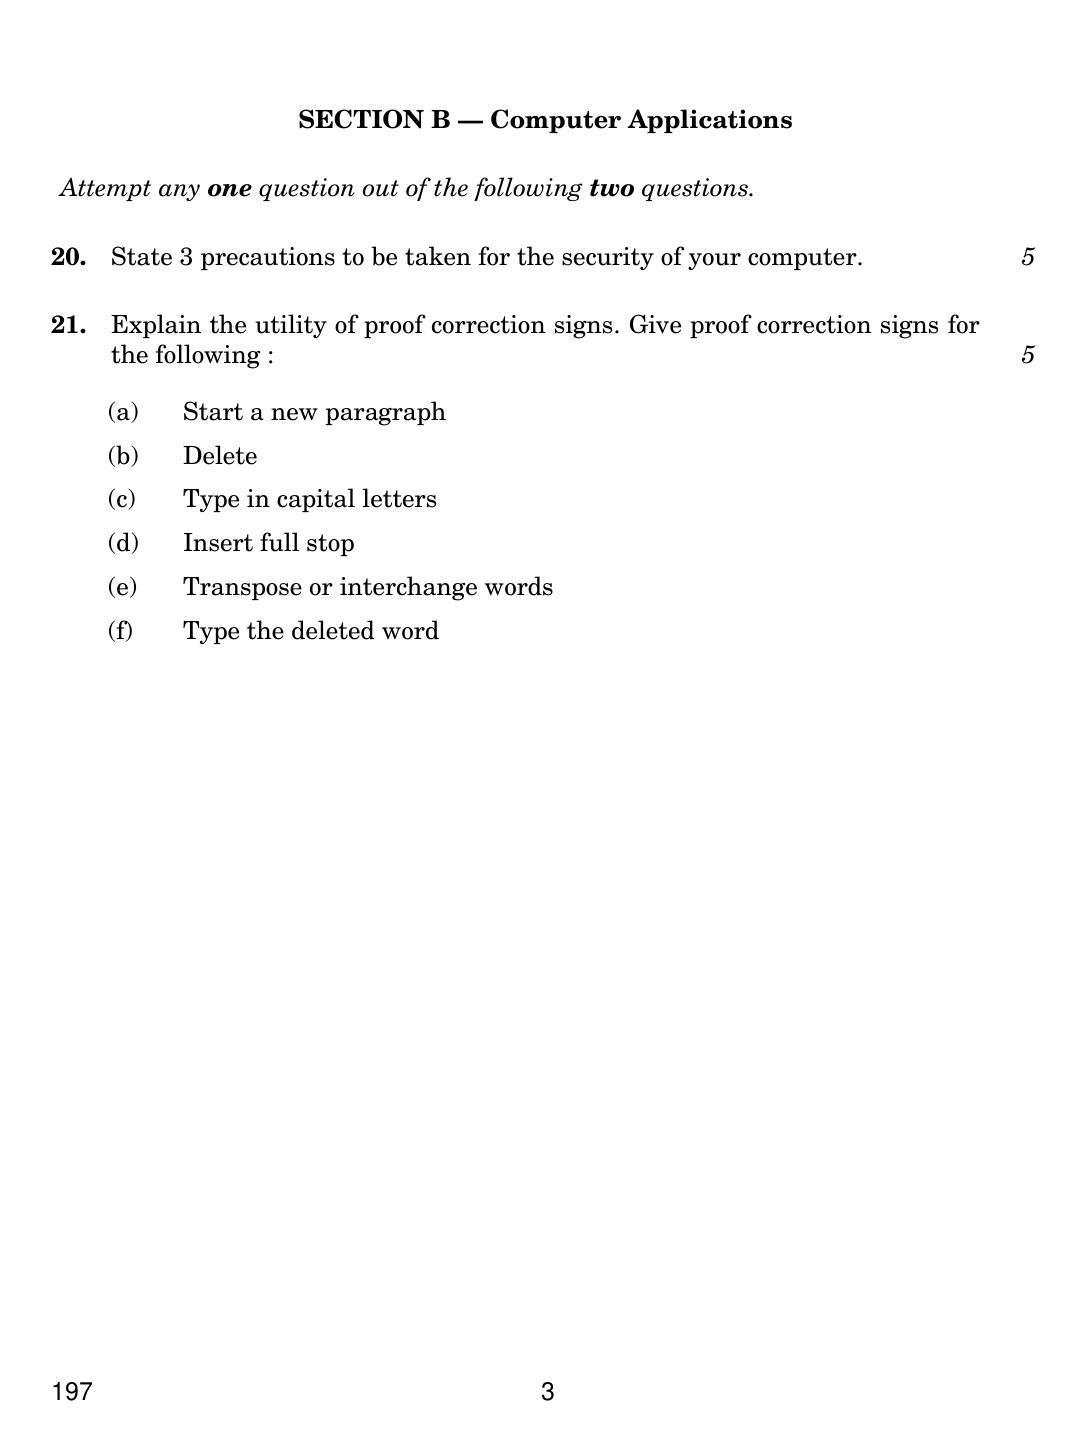 CBSE Class 12 197 Typography & Computer Applications (English) 2019 Question Paper - Page 3